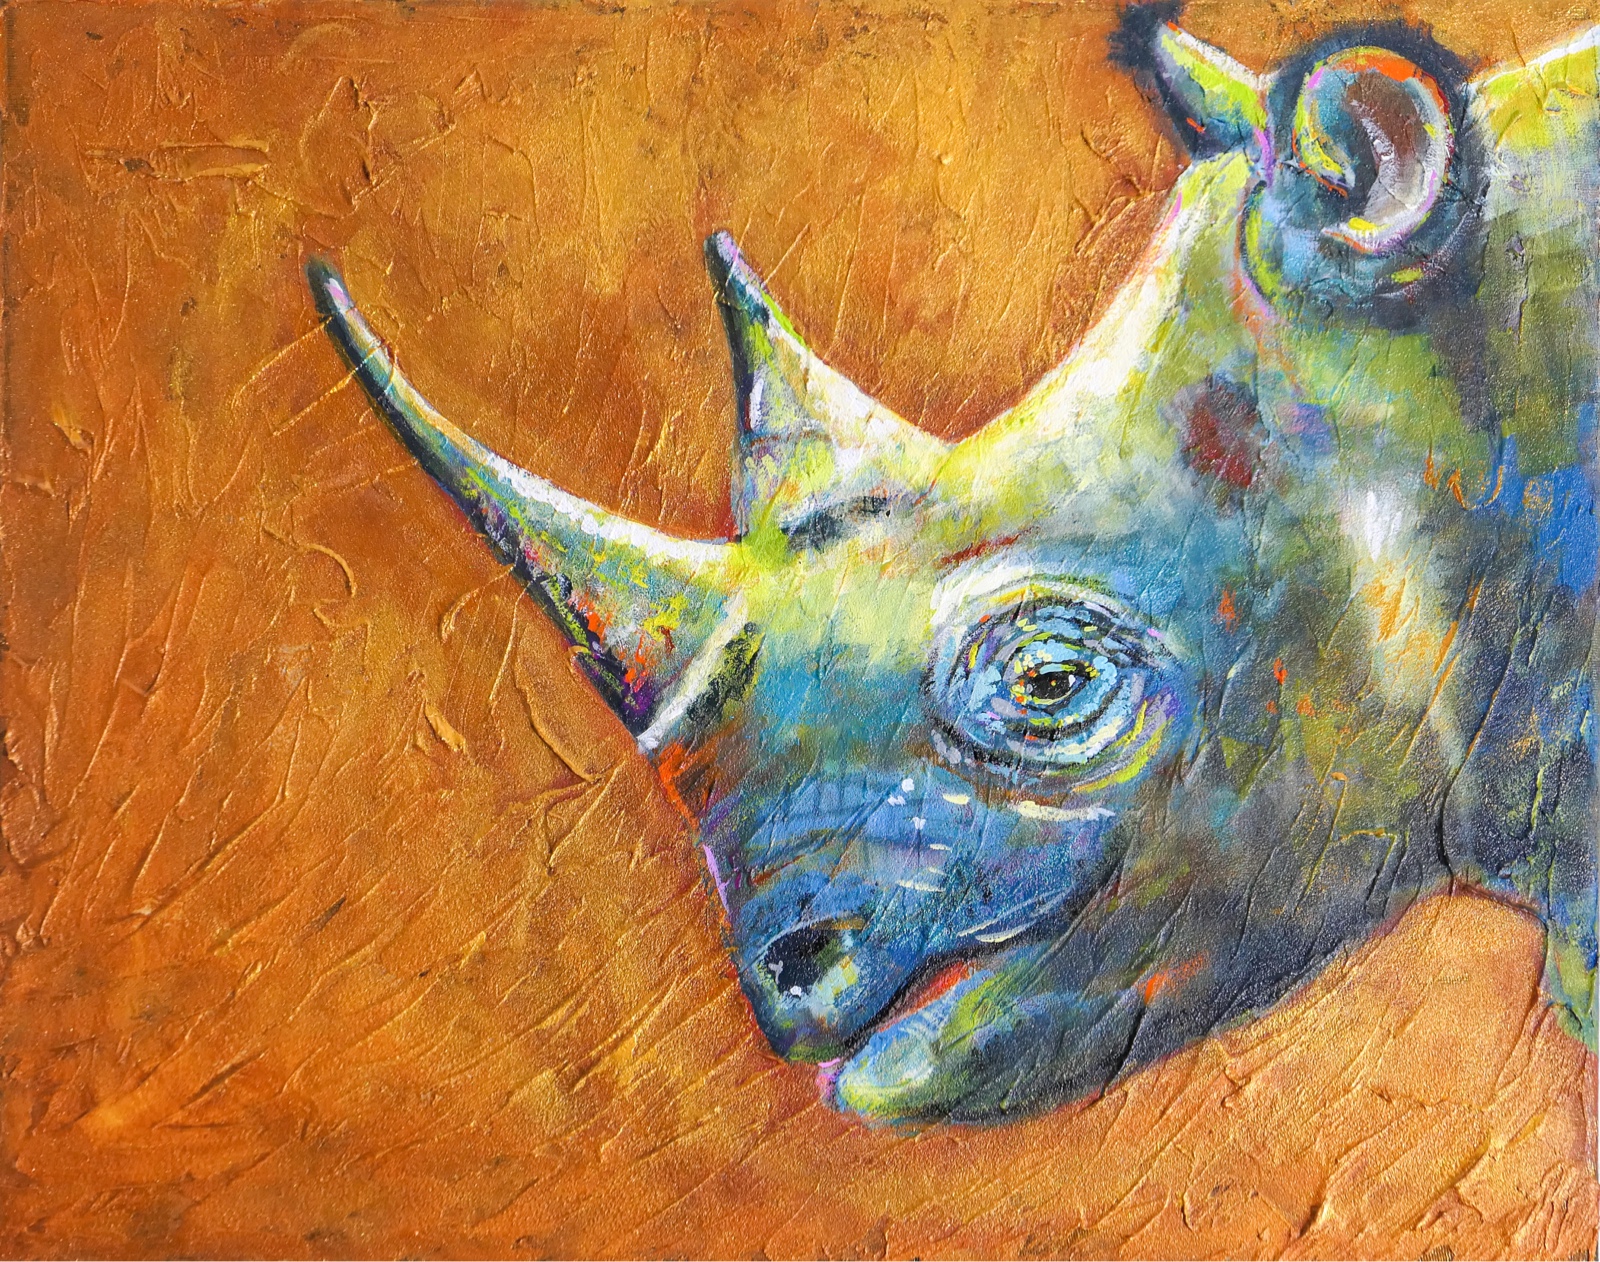 Acrylic painting of a rhino by Michelle Pakron